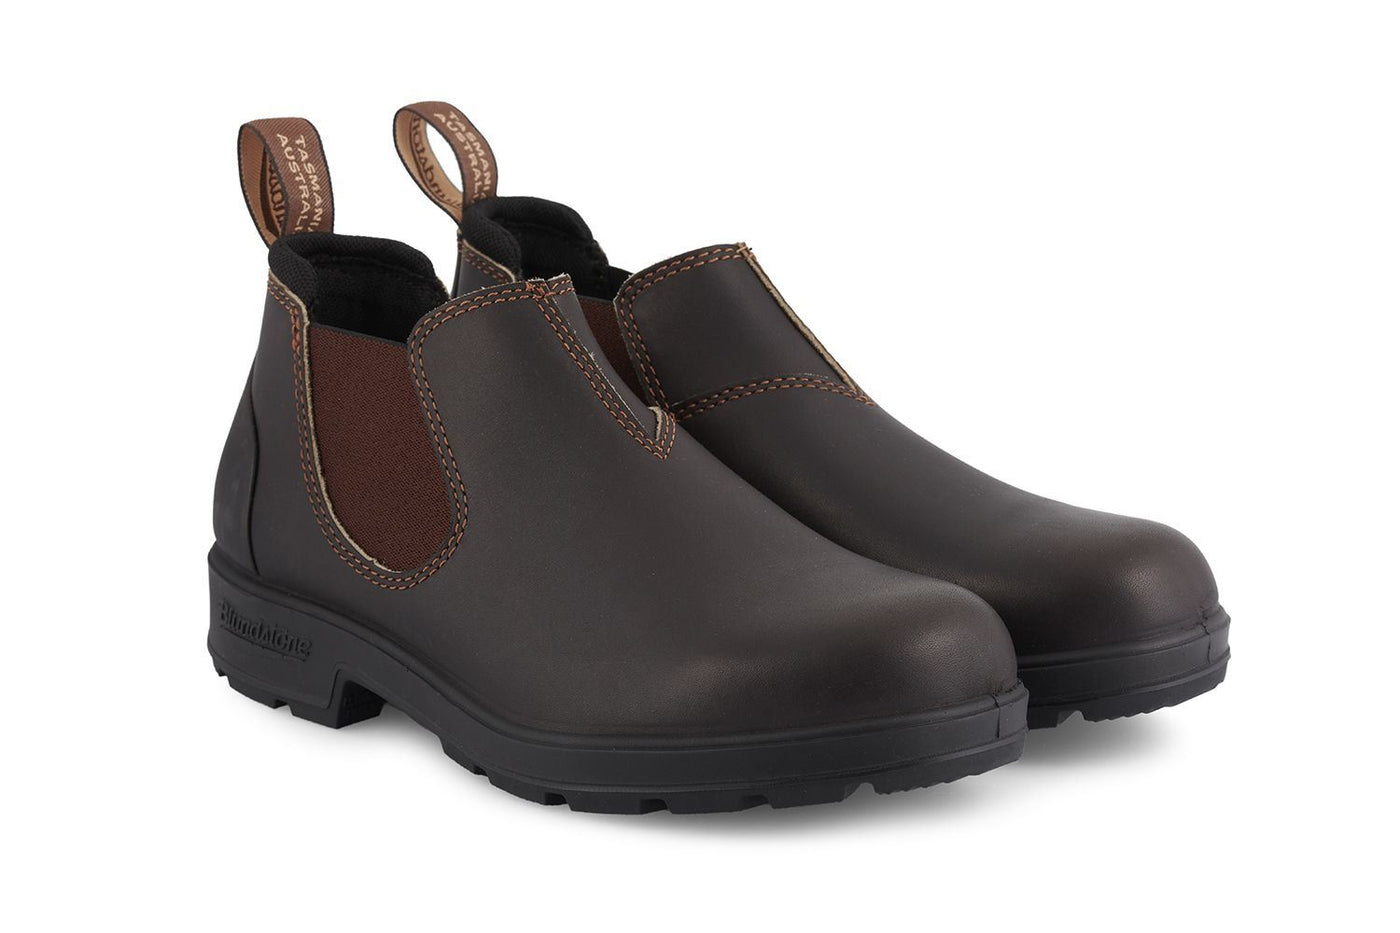 Blundstone #2038 Stout Brown Chelsea Boot